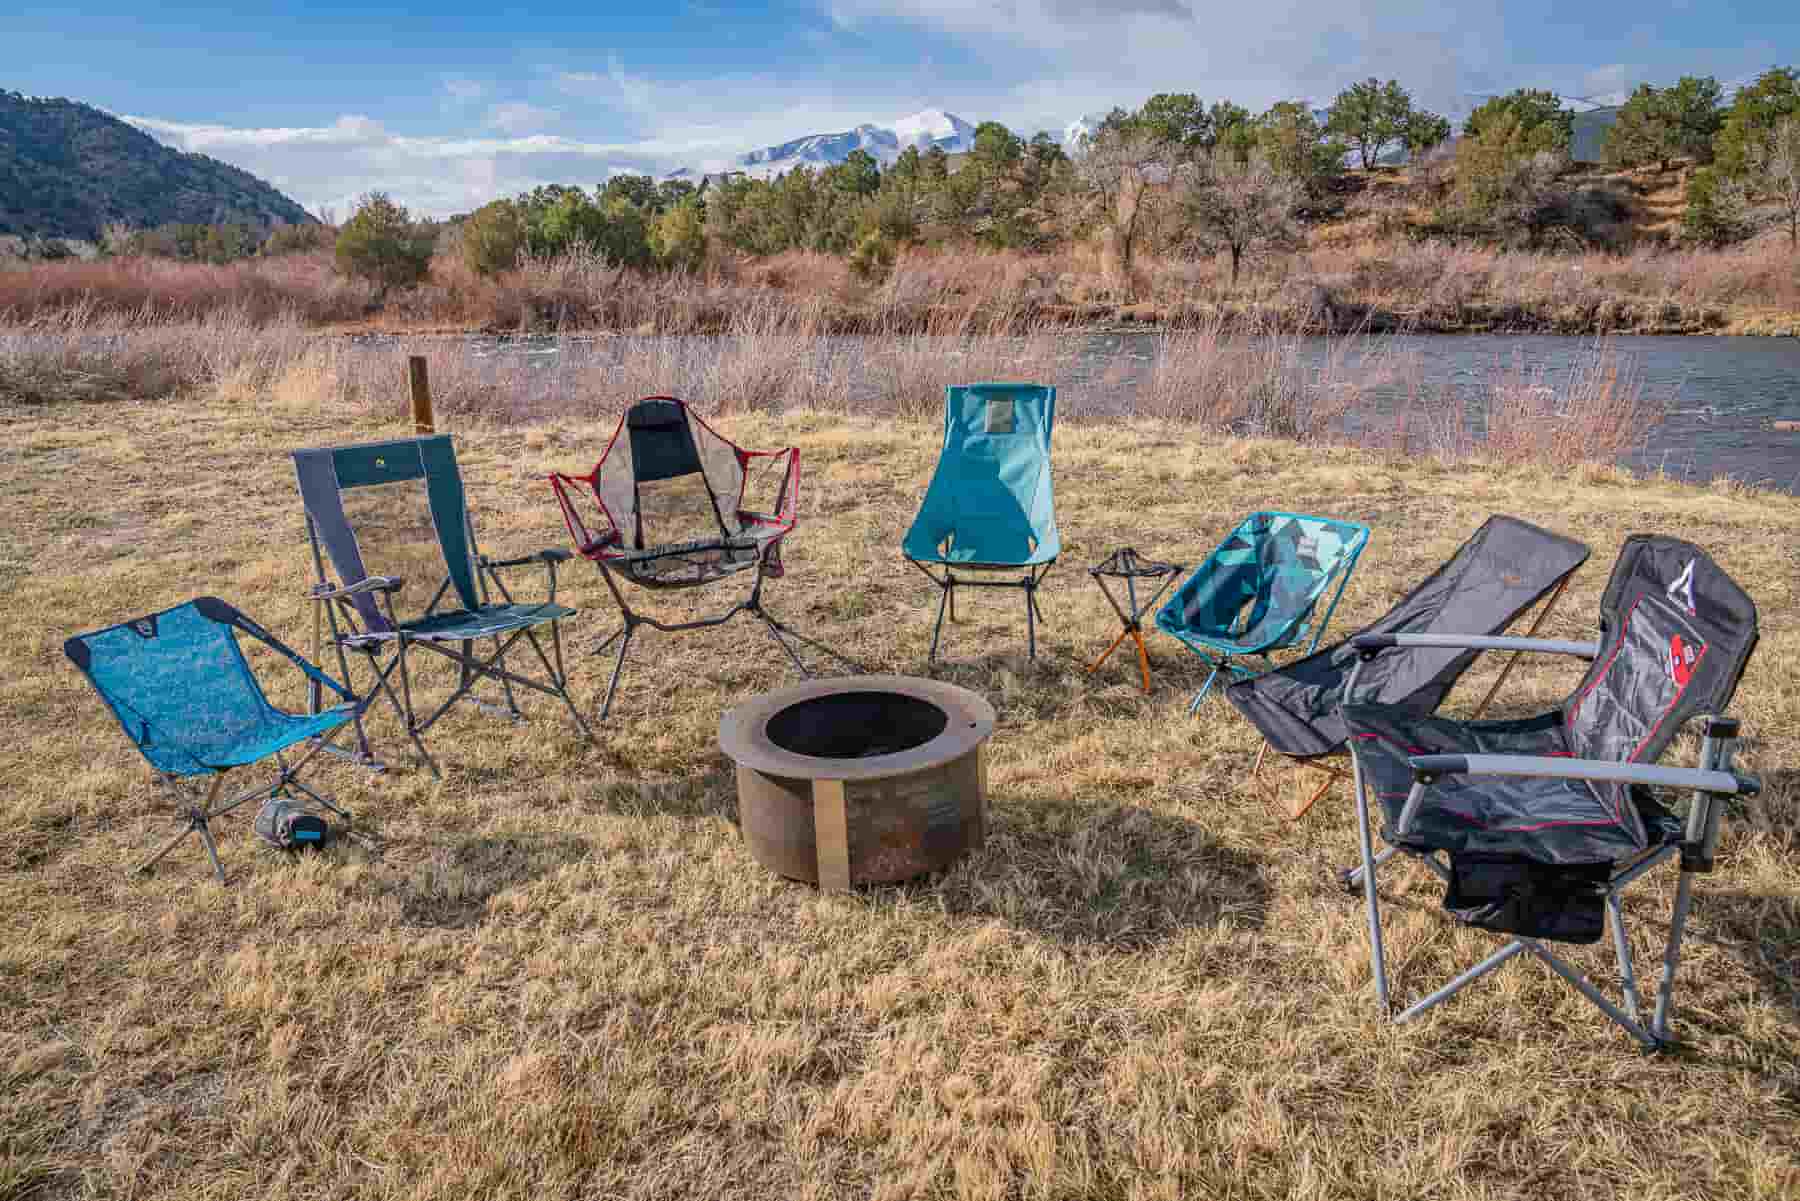 camping foldable chairs